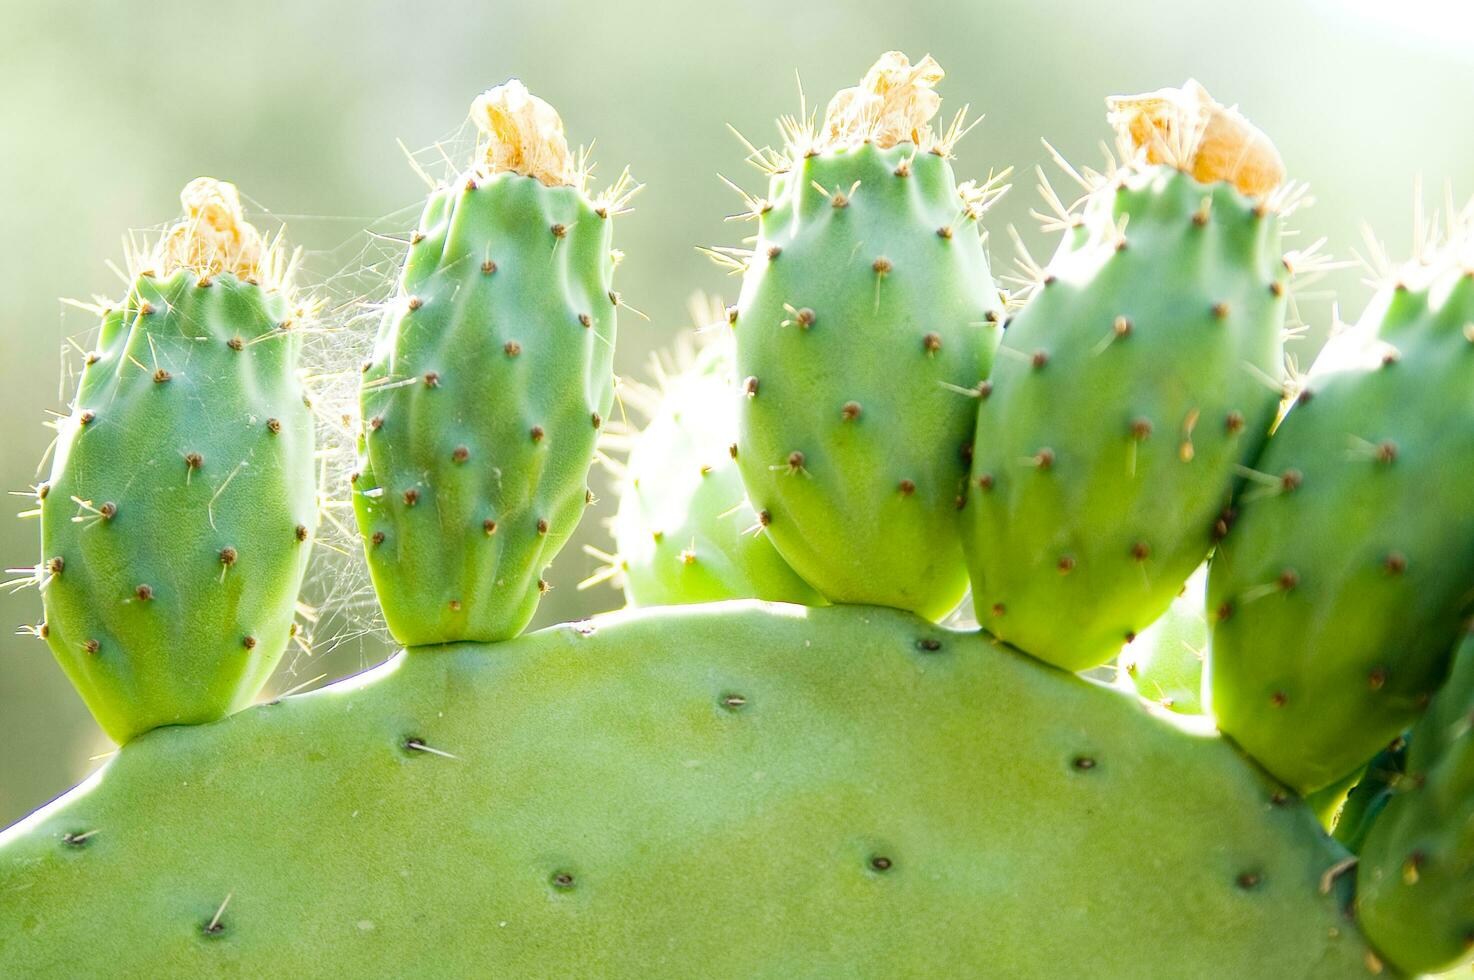 a close up of a cactus with many green leaves photo